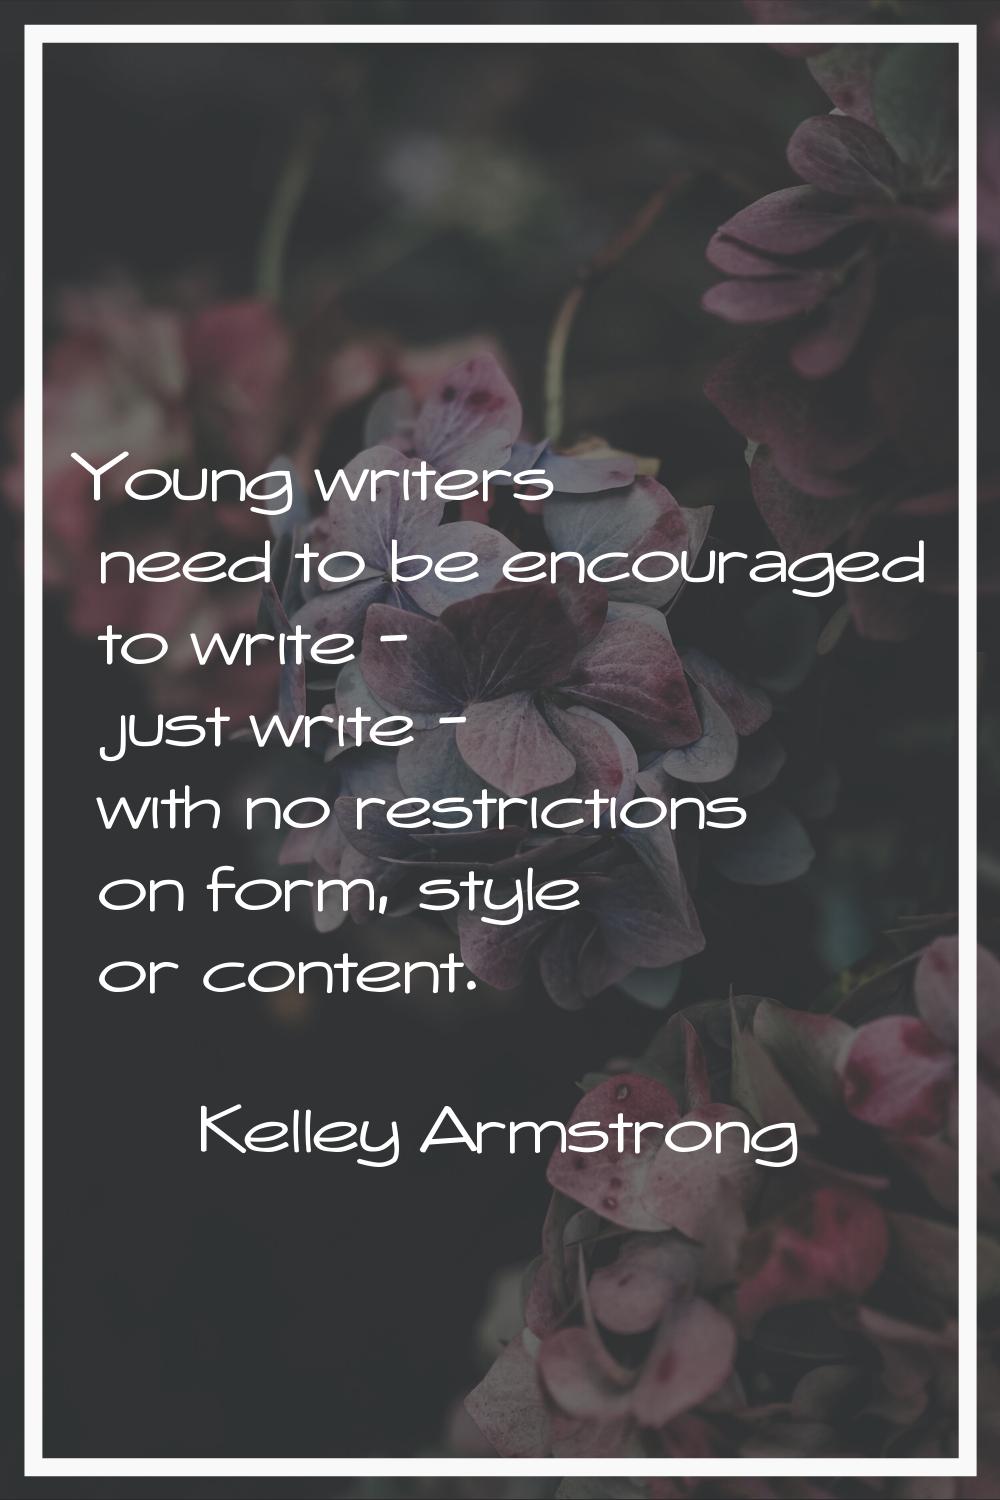 Young writers need to be encouraged to write - just write - with no restrictions on form, style or 